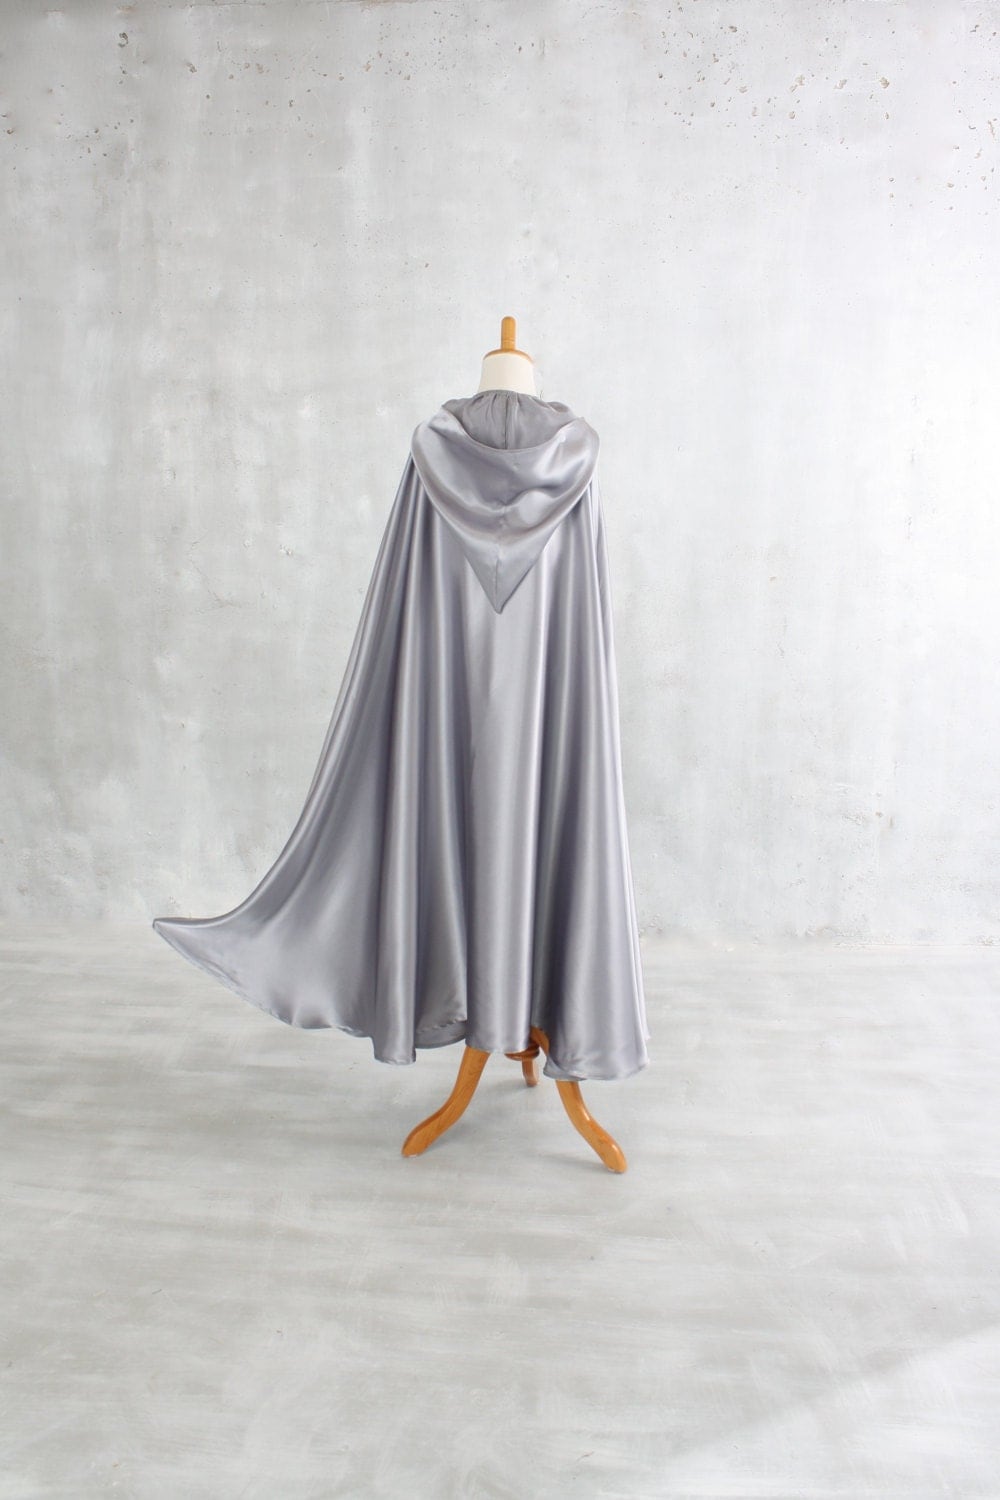 Childs Silver Cloak of Invisibility Kids Silver Satin Hooded